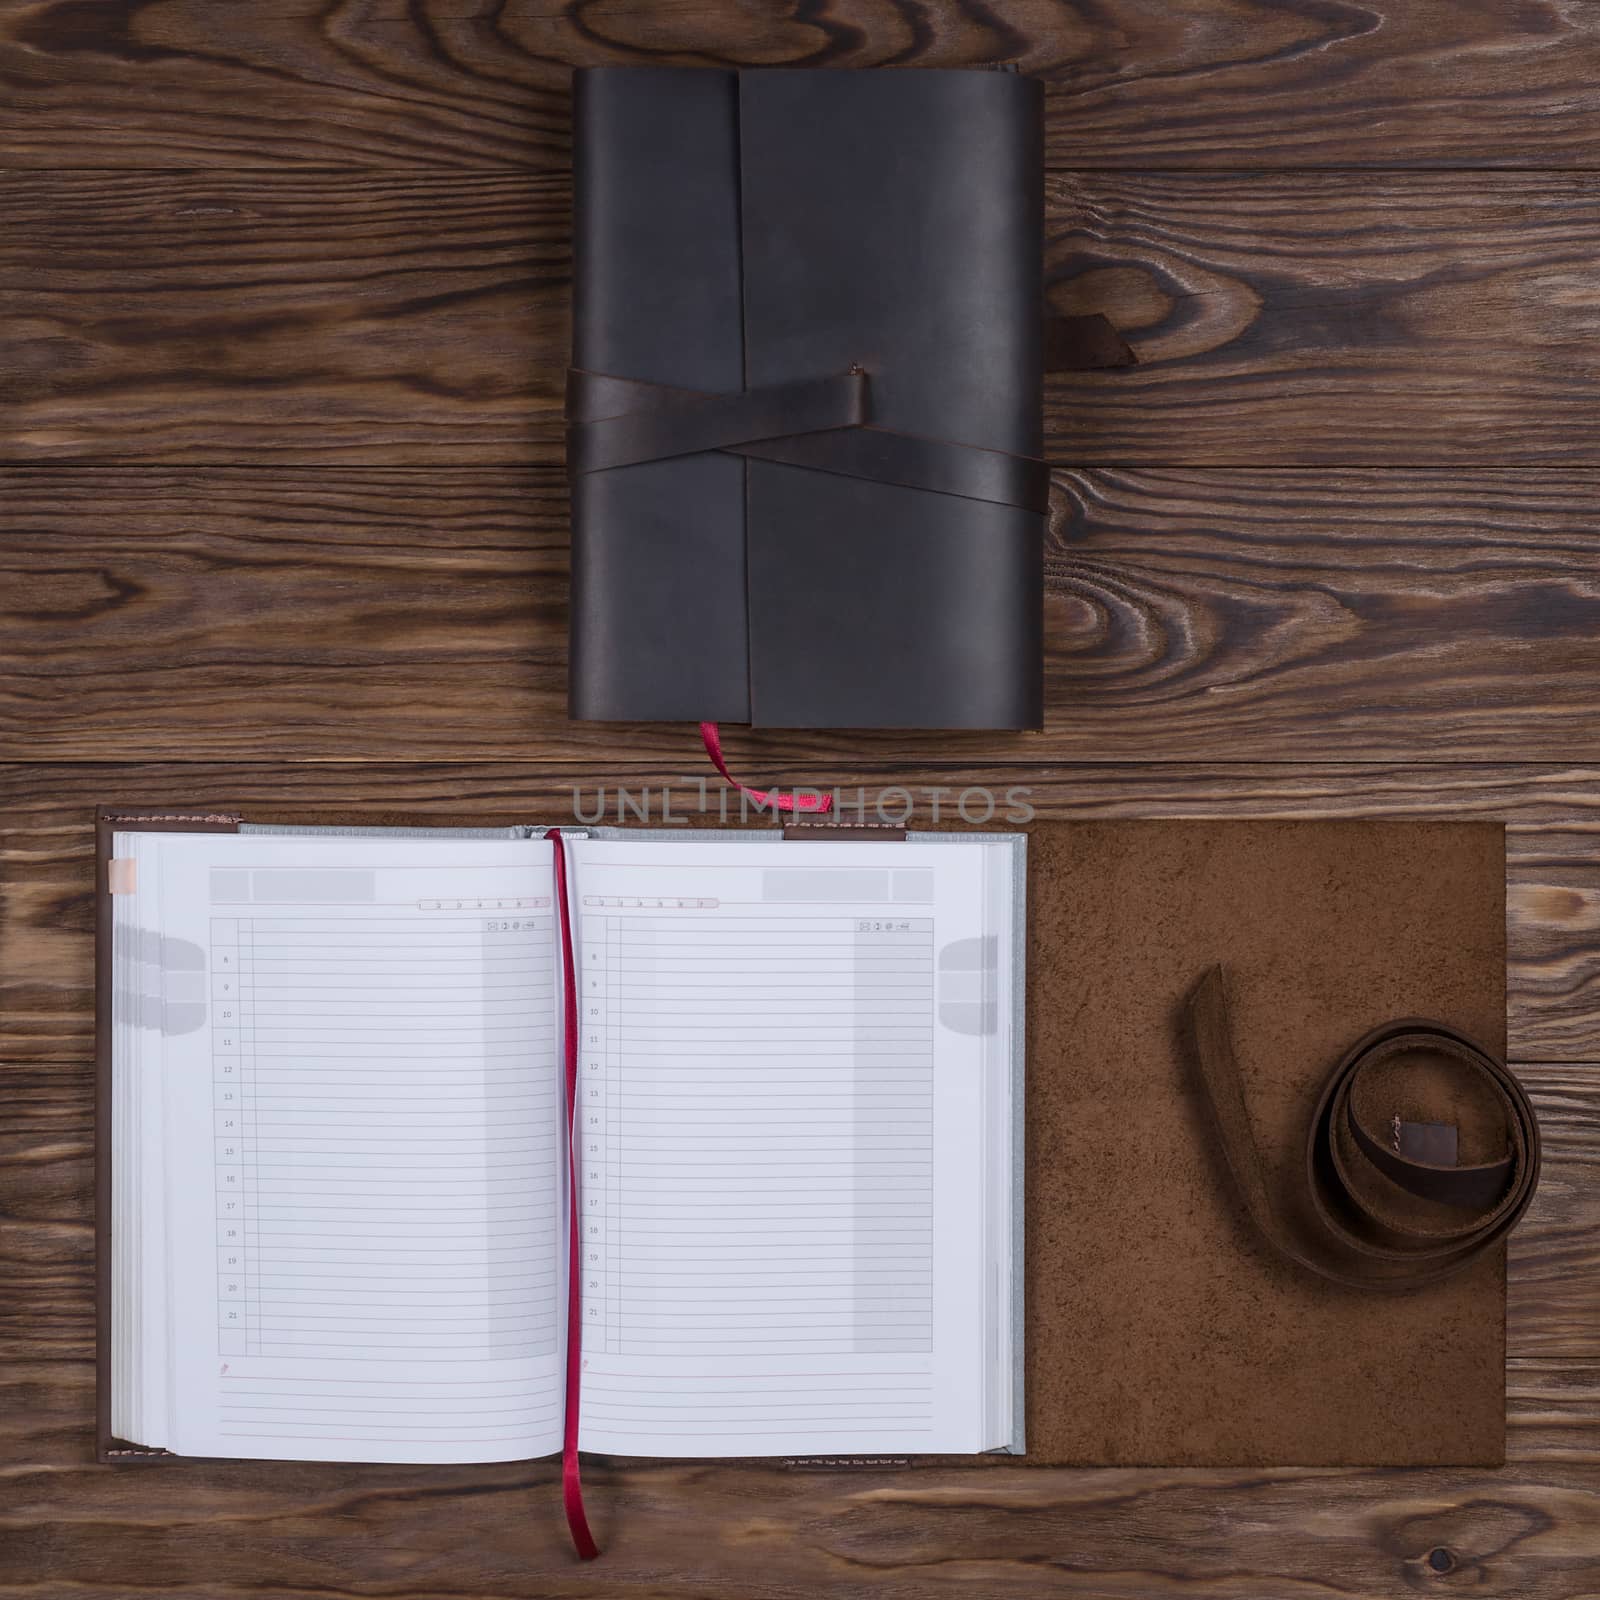 Black and brown opened handmade leather notebook cover with notebook inside on wooden background. Stock photo of luxury business accessories.